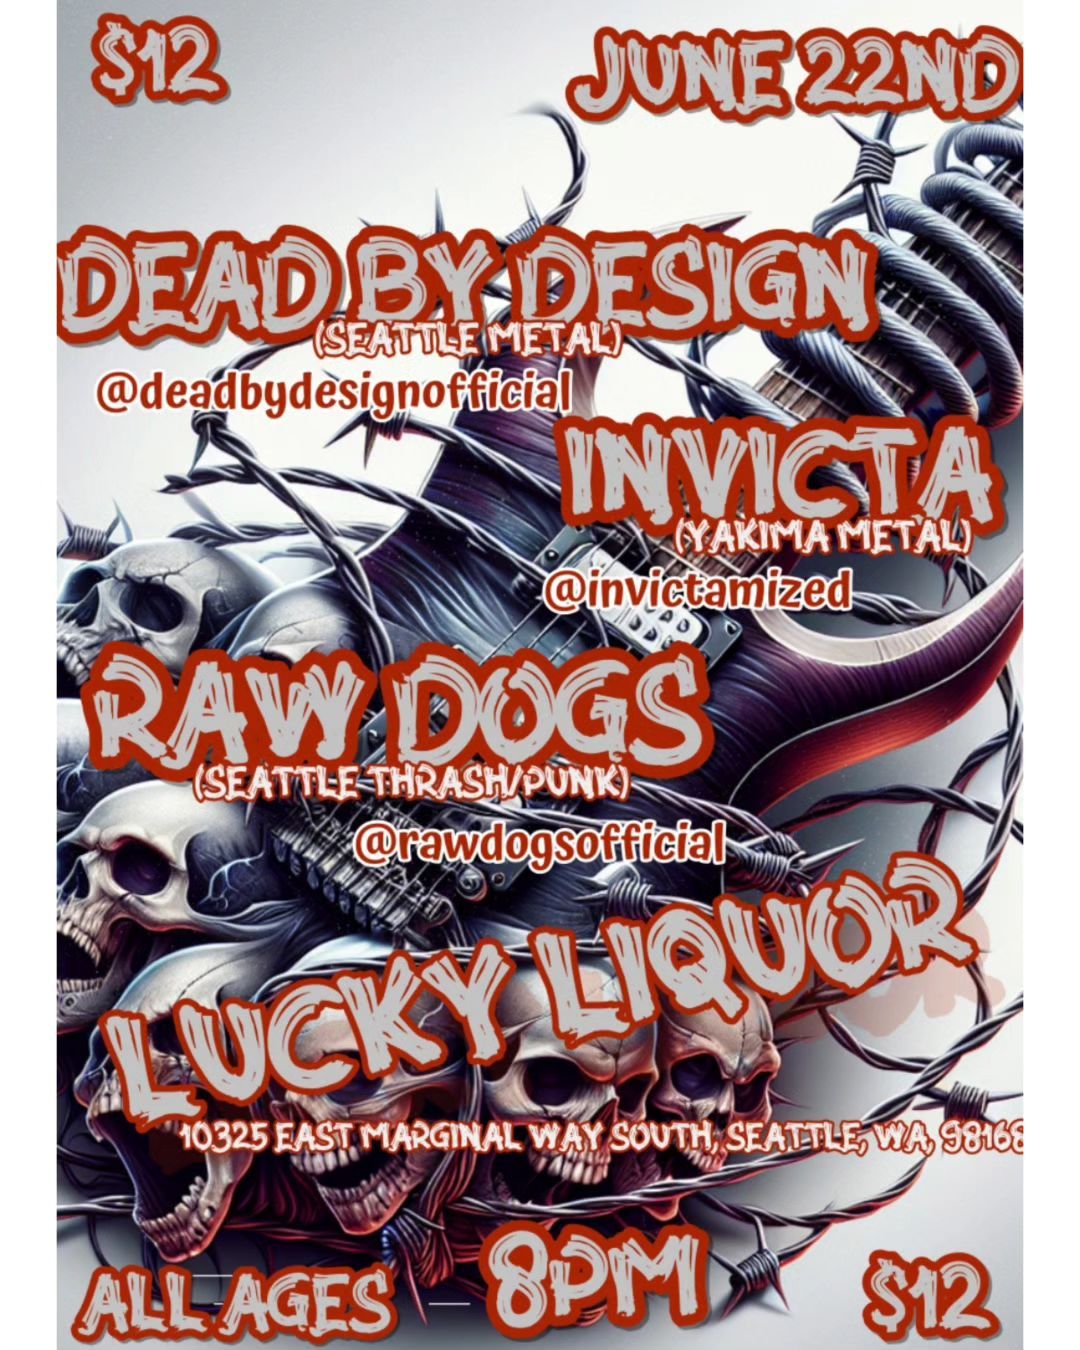 Dead by Design, Invicta, Raw Dogs @ Lucky Liquor ALL AGES! 